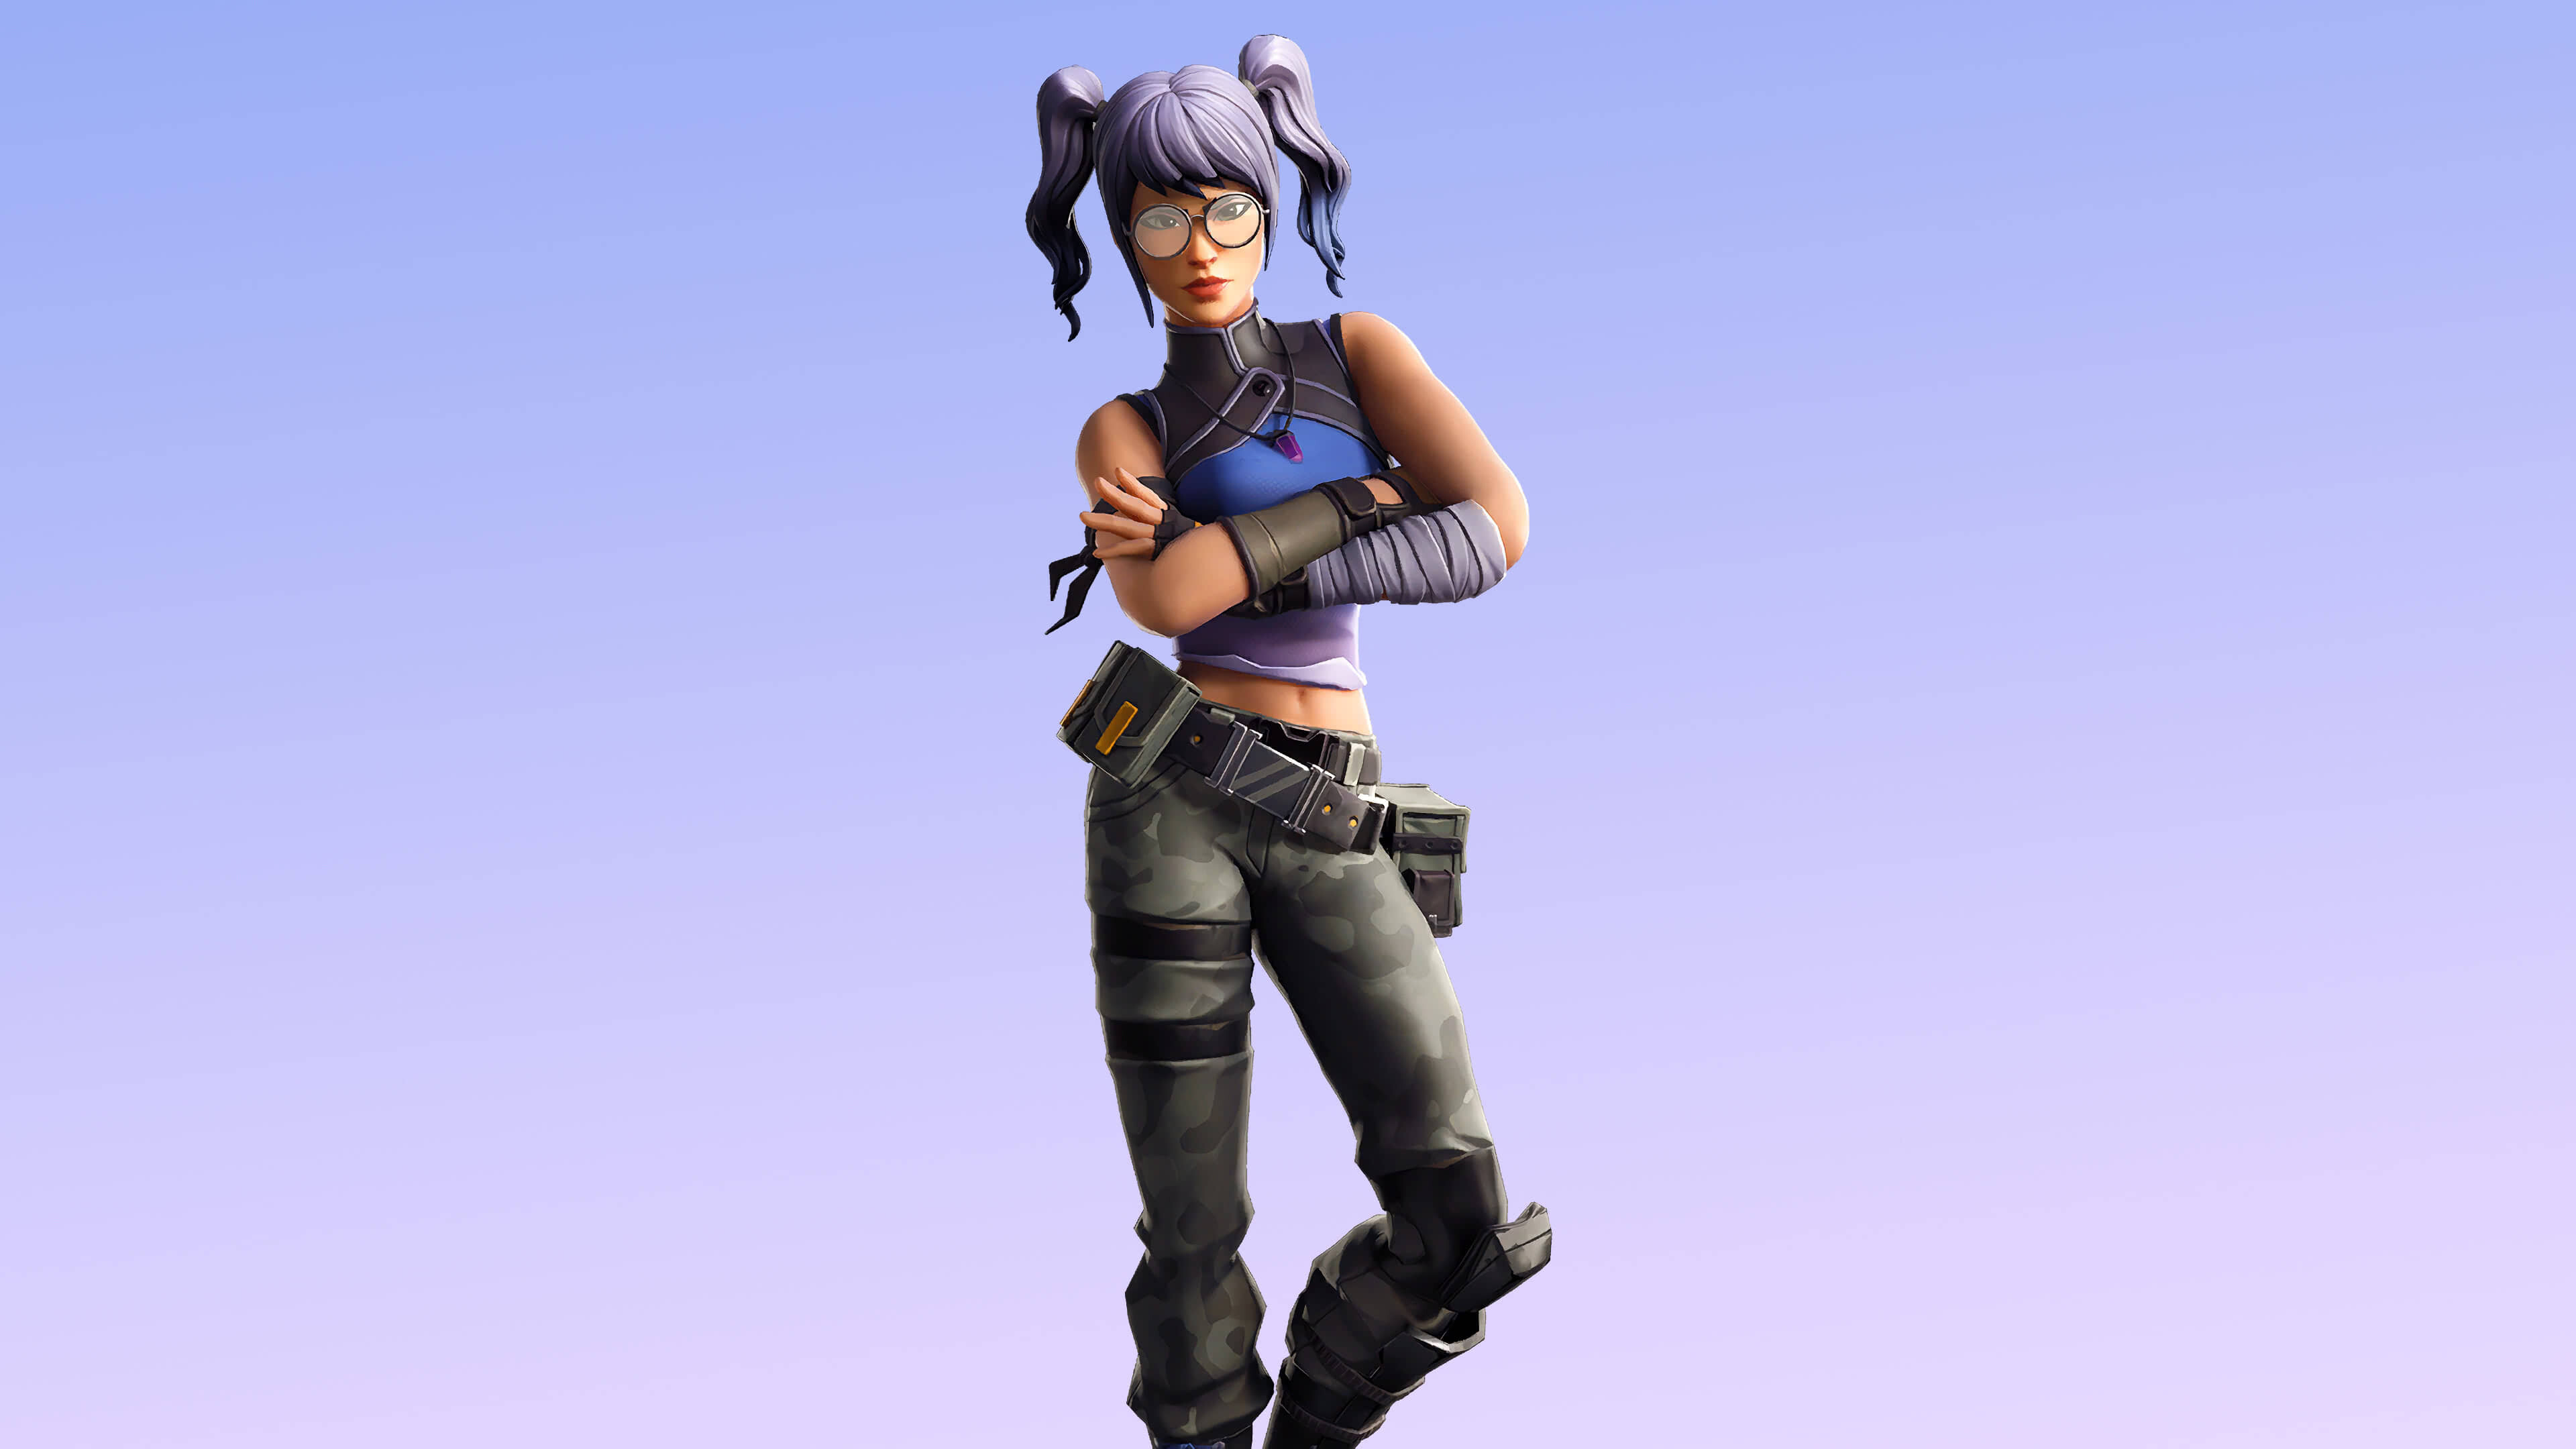 Fortnite: Crystal Skin, Belongs to Chapter 1 Season 10, Outfit can be purchased in Item Shop for 800 V-Bucks. 3840x2160 4K Background.